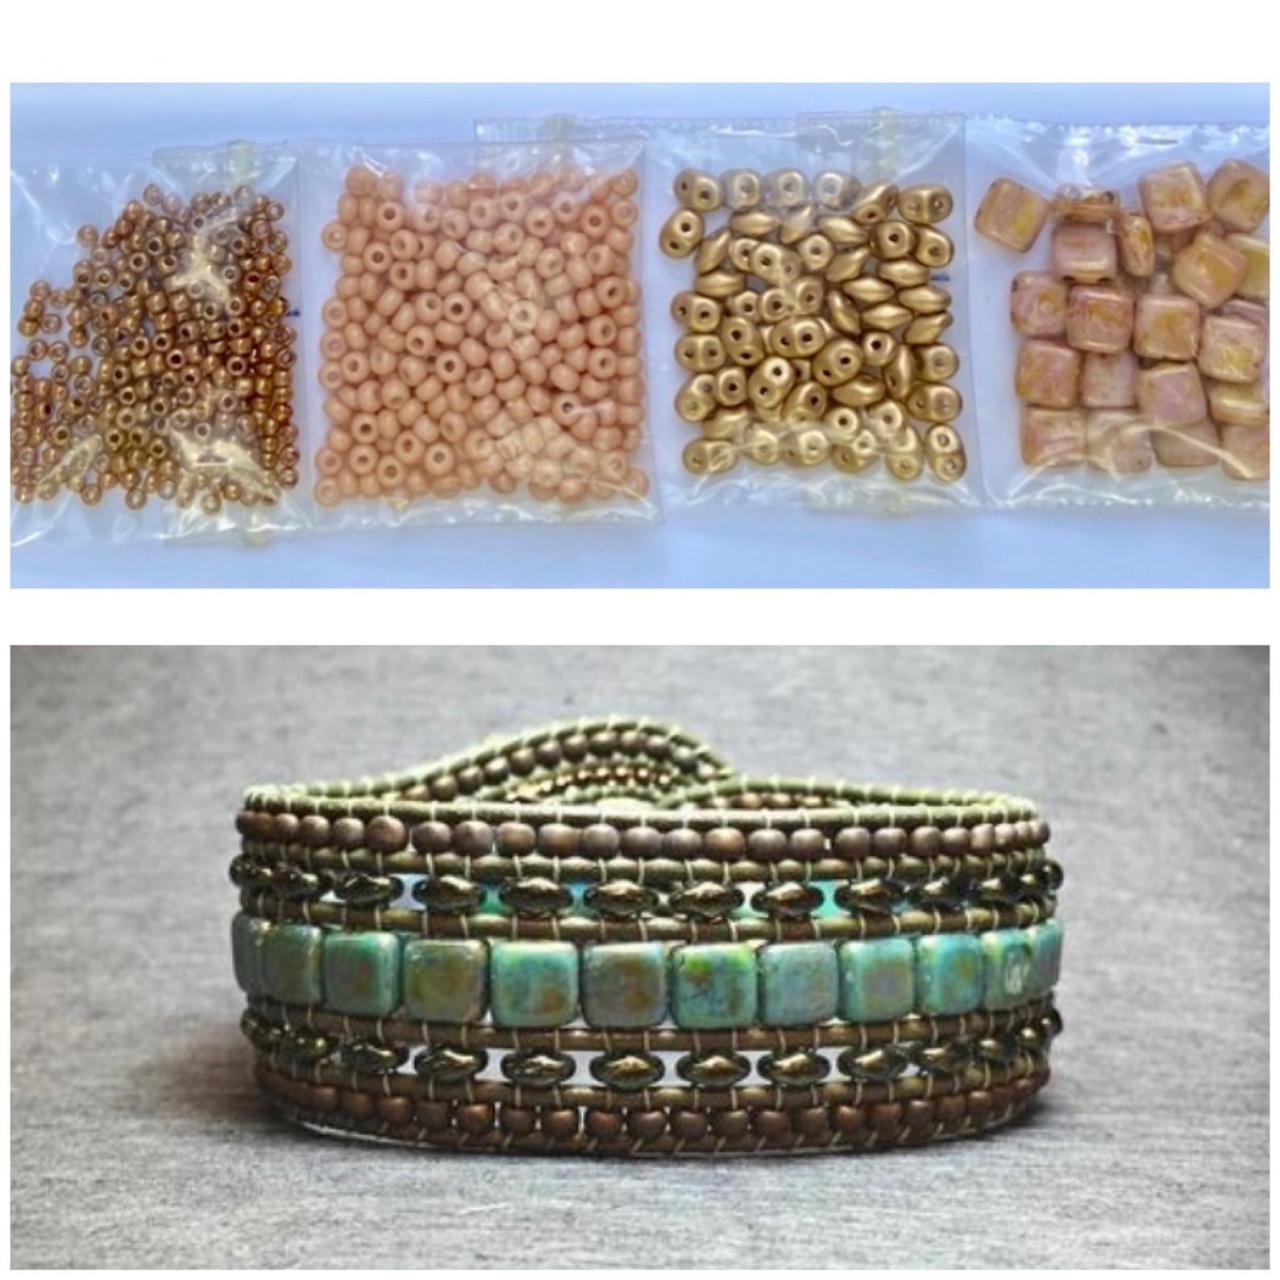 Kit Wide Leather Beaded Cuff Kit By Leila Martin Bonny Bohemian Pink Gold Diy Intermediate Instructions Complete No Tools #4